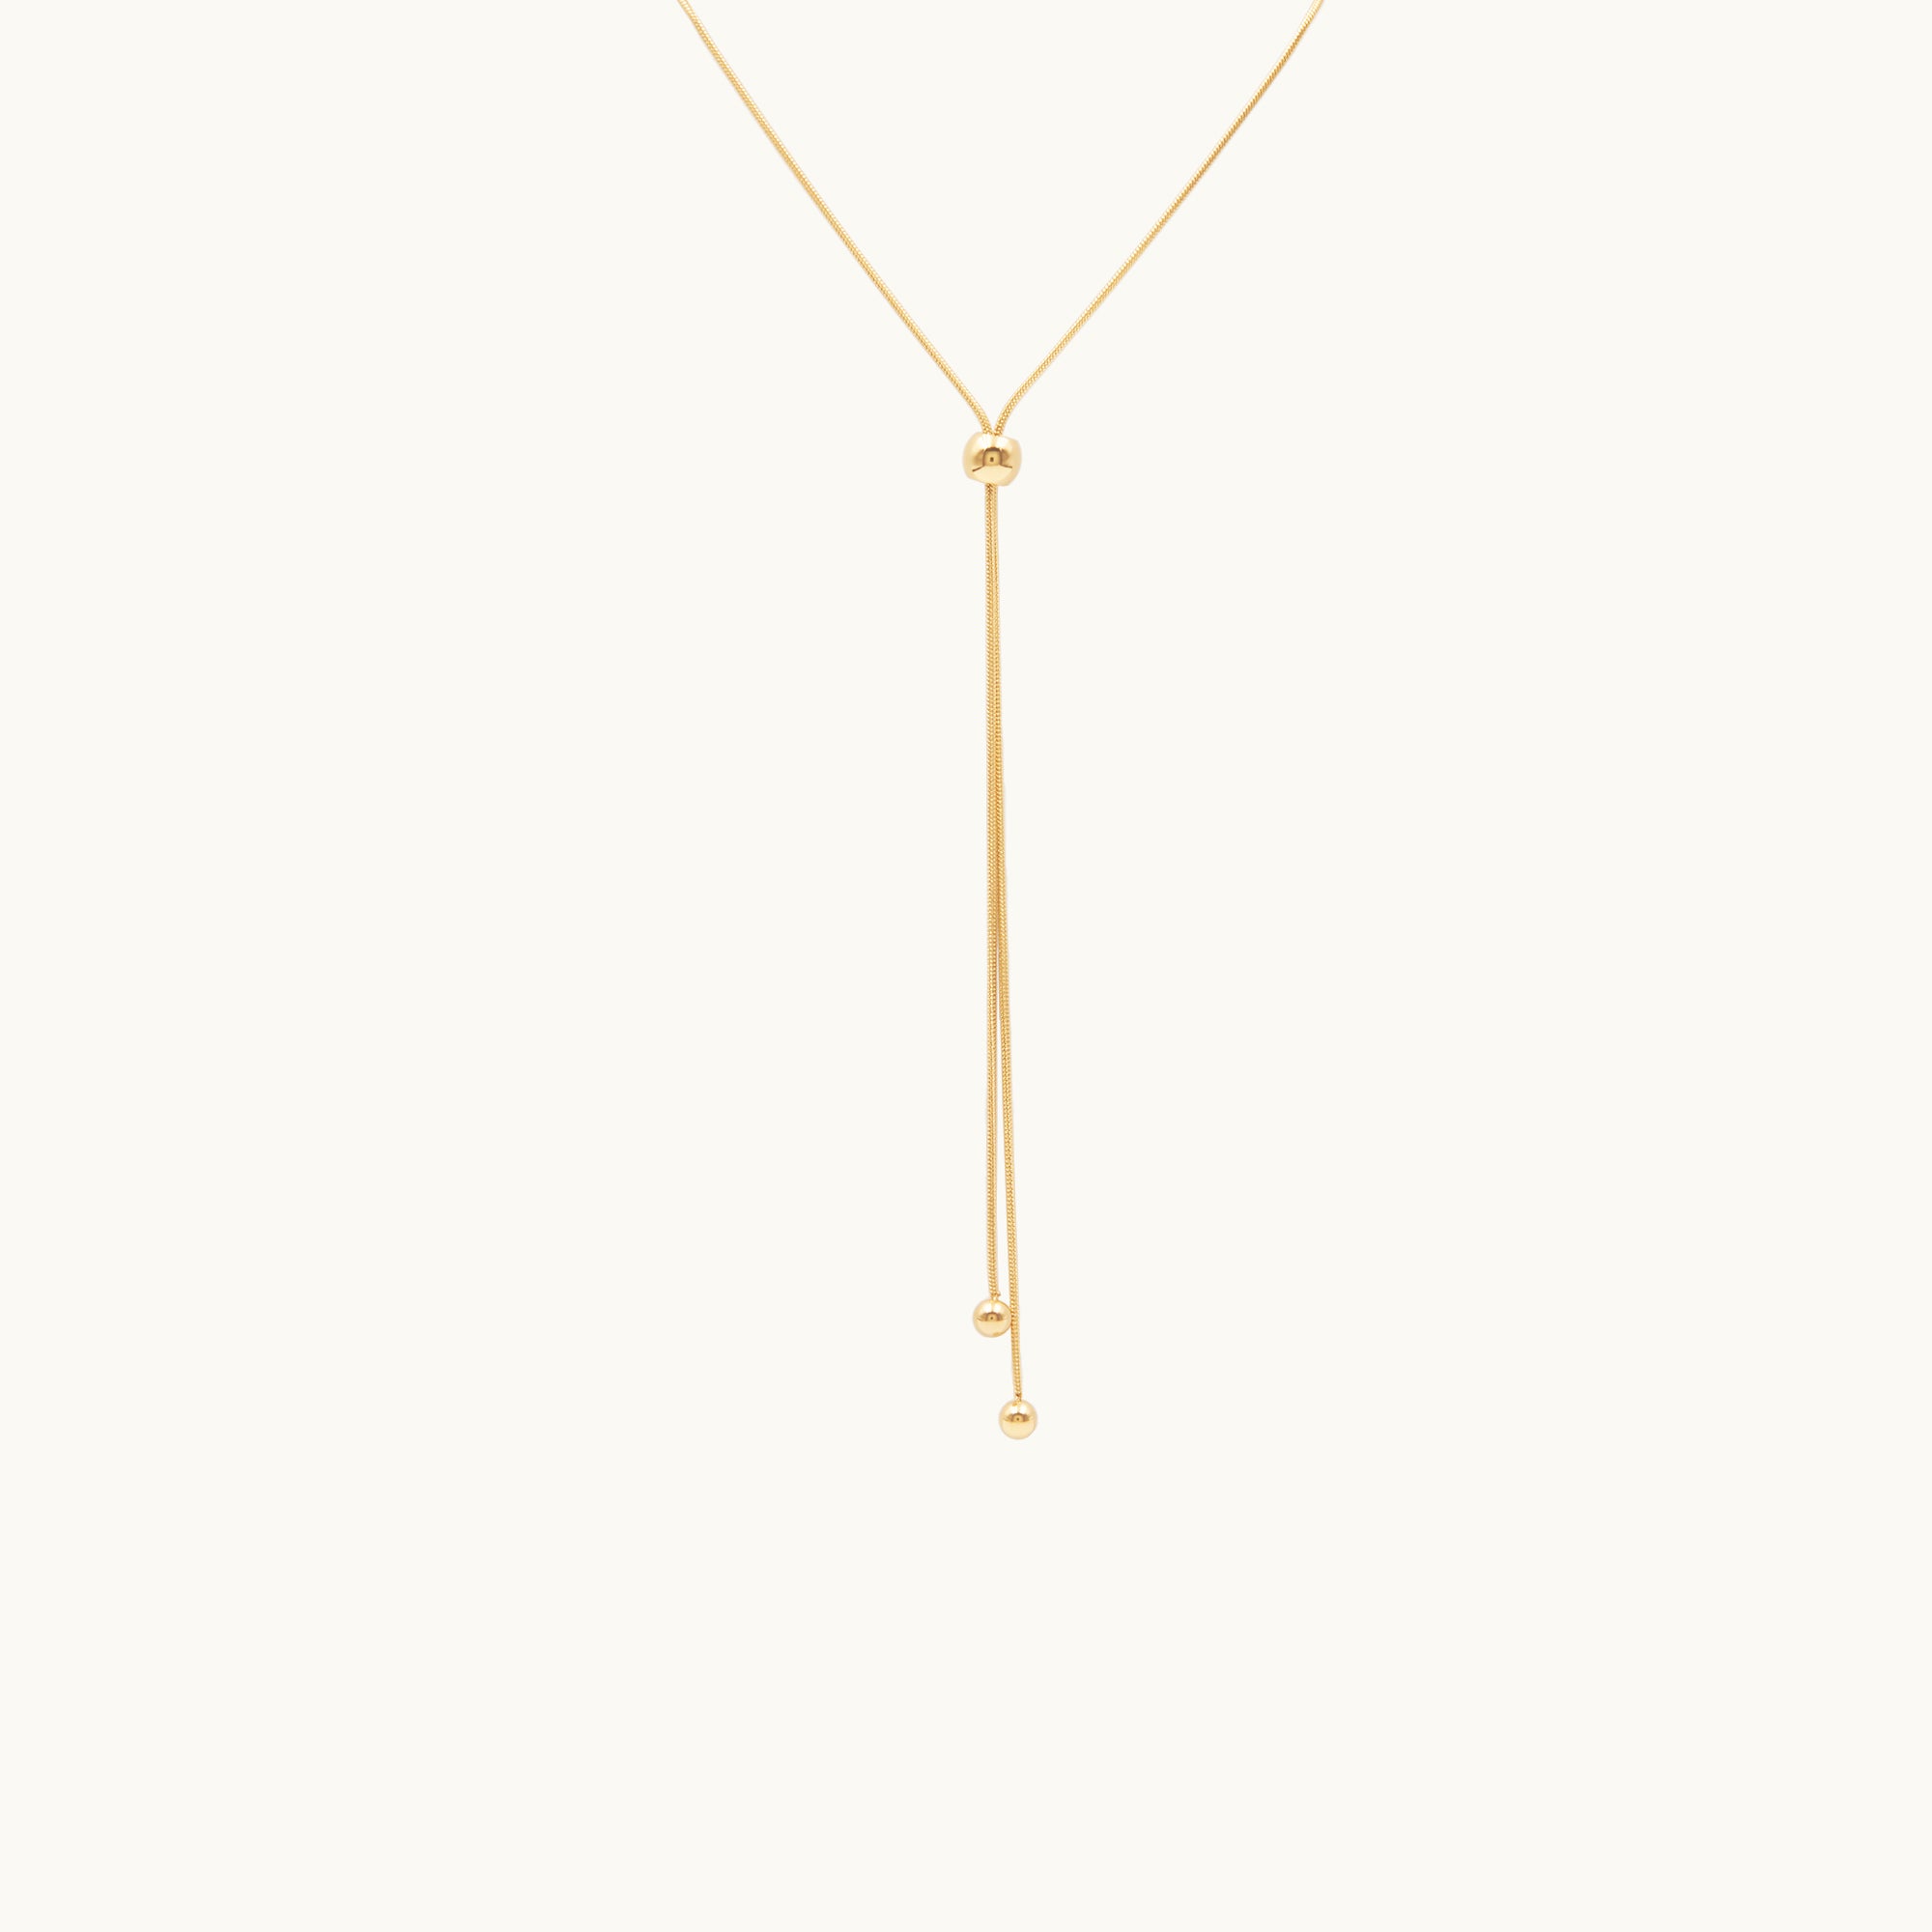 Chain Ball Y Lariat Necklace Adjustable Gold Plated